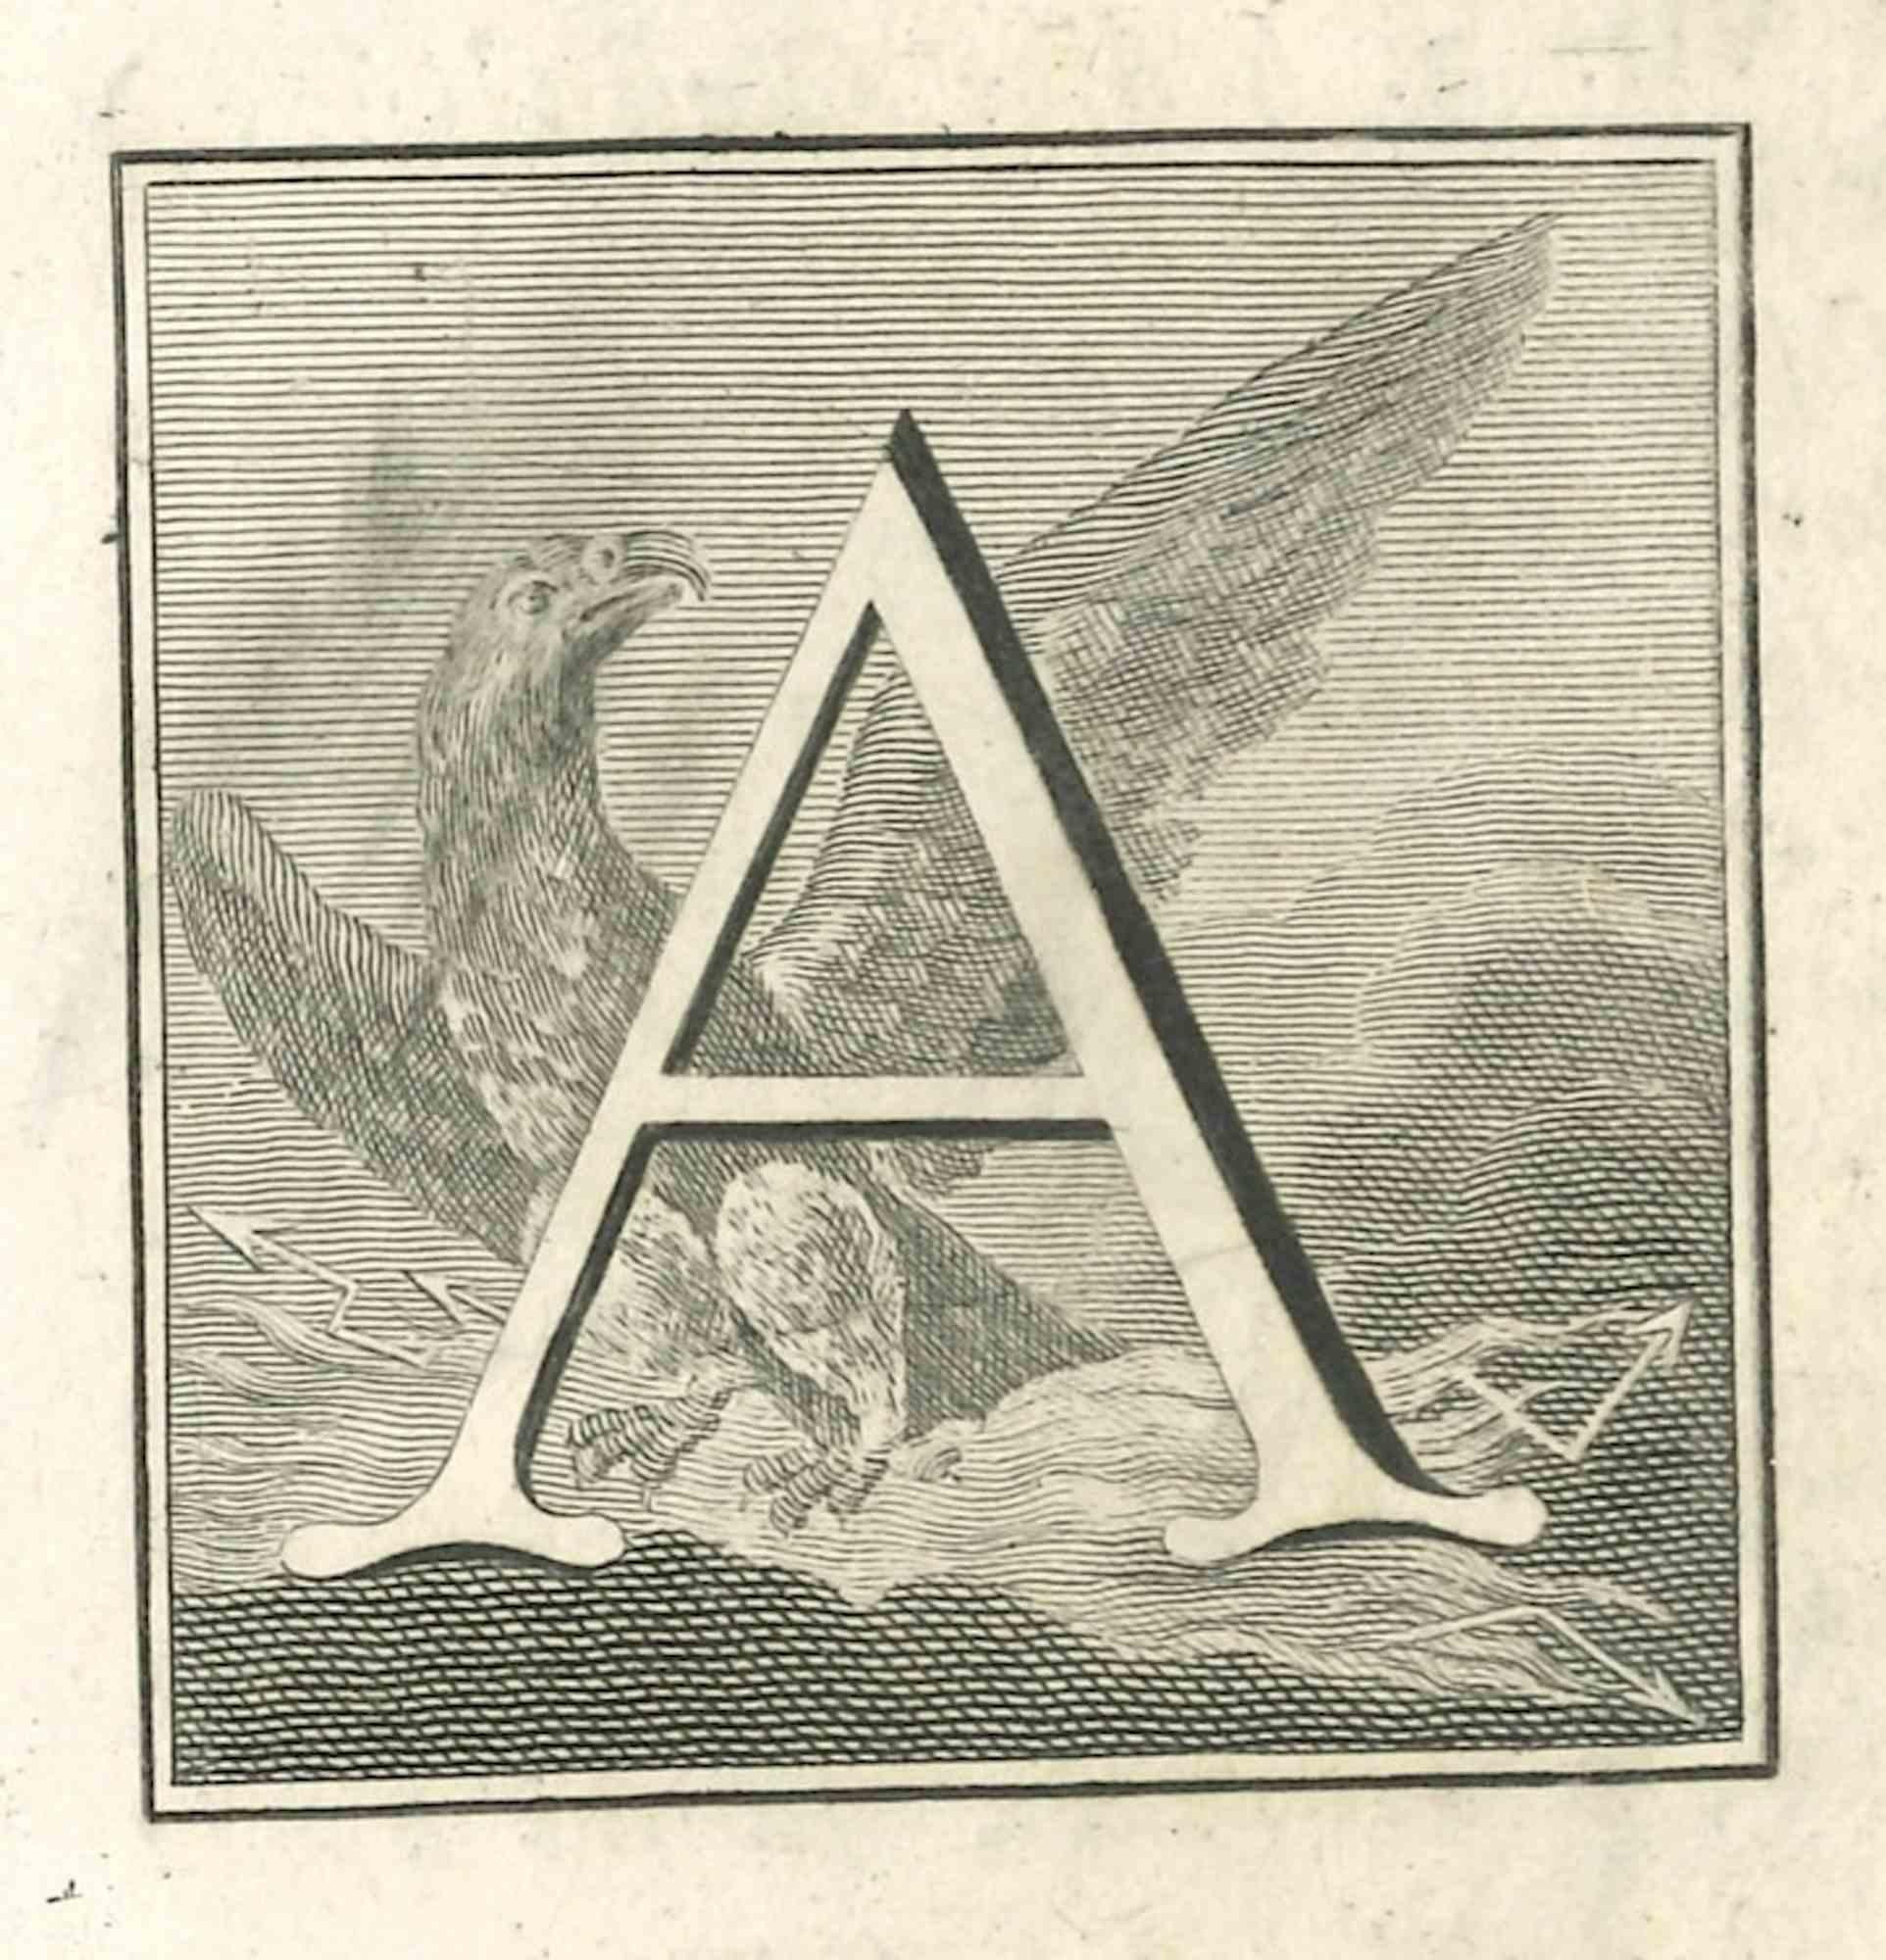 Letter of the Alphabet A,  from the series "Antiquities of Herculaneum", is an etching on paper realized by Various Authors in the 18th century.

Good conditions.

The etching belongs to the print suite “Antiquities of Herculaneum Exposed” (original